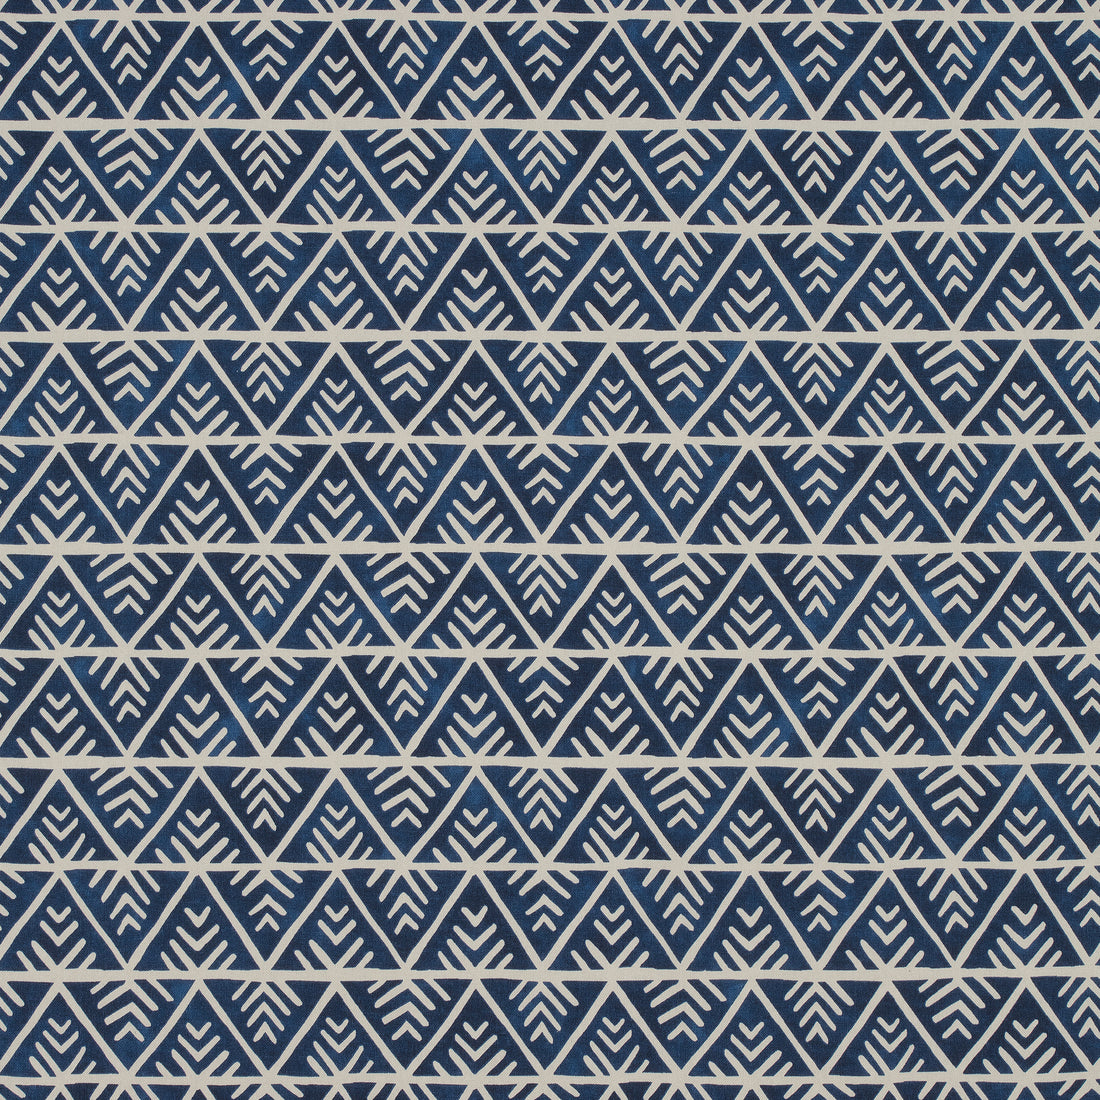 Jules fabric in navy color - pattern number AF78704 - by Anna French in the Palampore collection